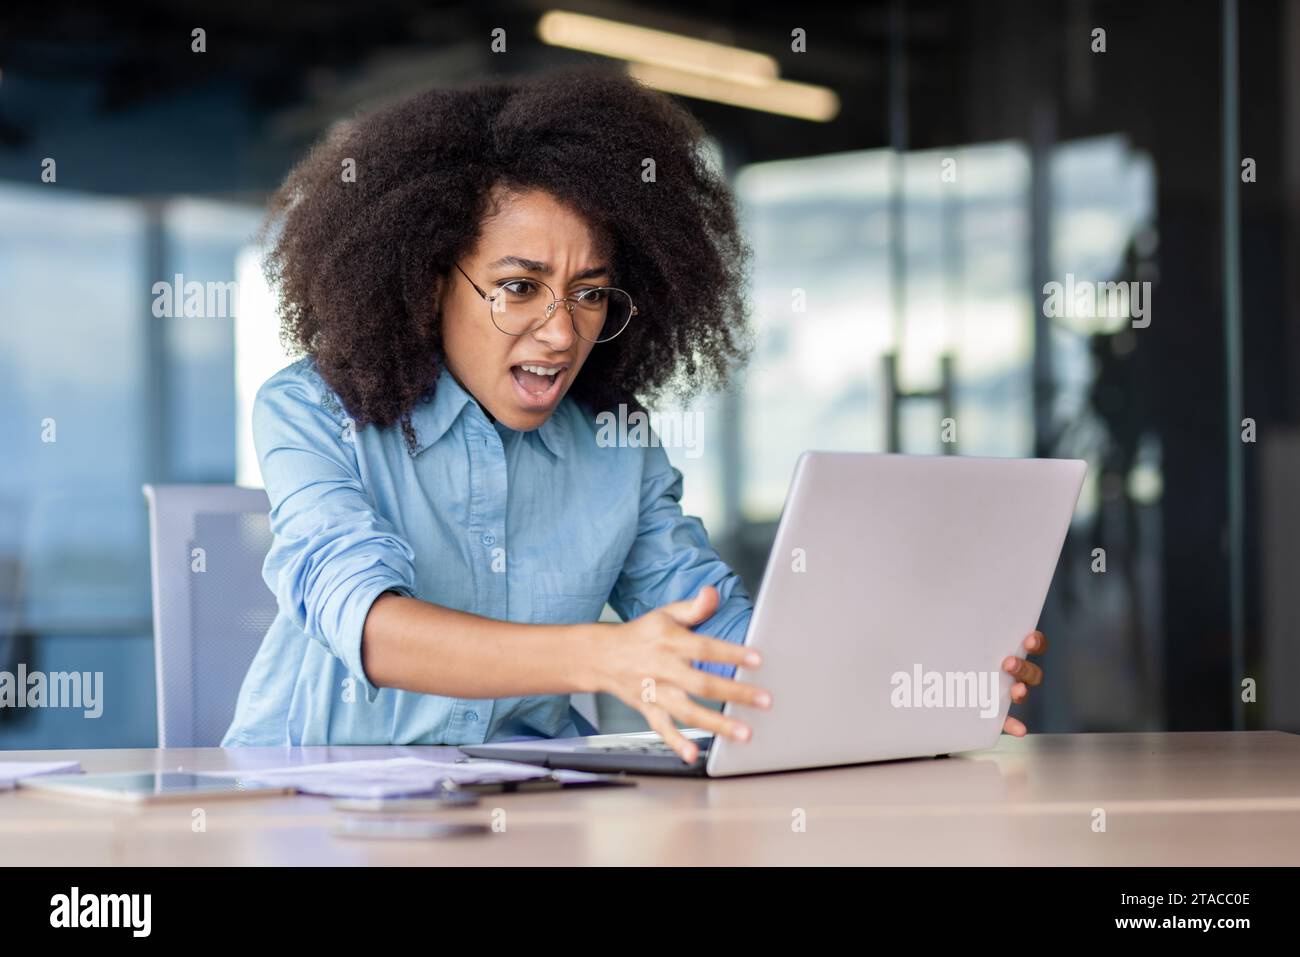 Woman at the workplace inside the office is not satisfied with the work of the computer, a frustrated businesswoman is shouting at a broken laptop, and overpriced broken software. Stock Photo